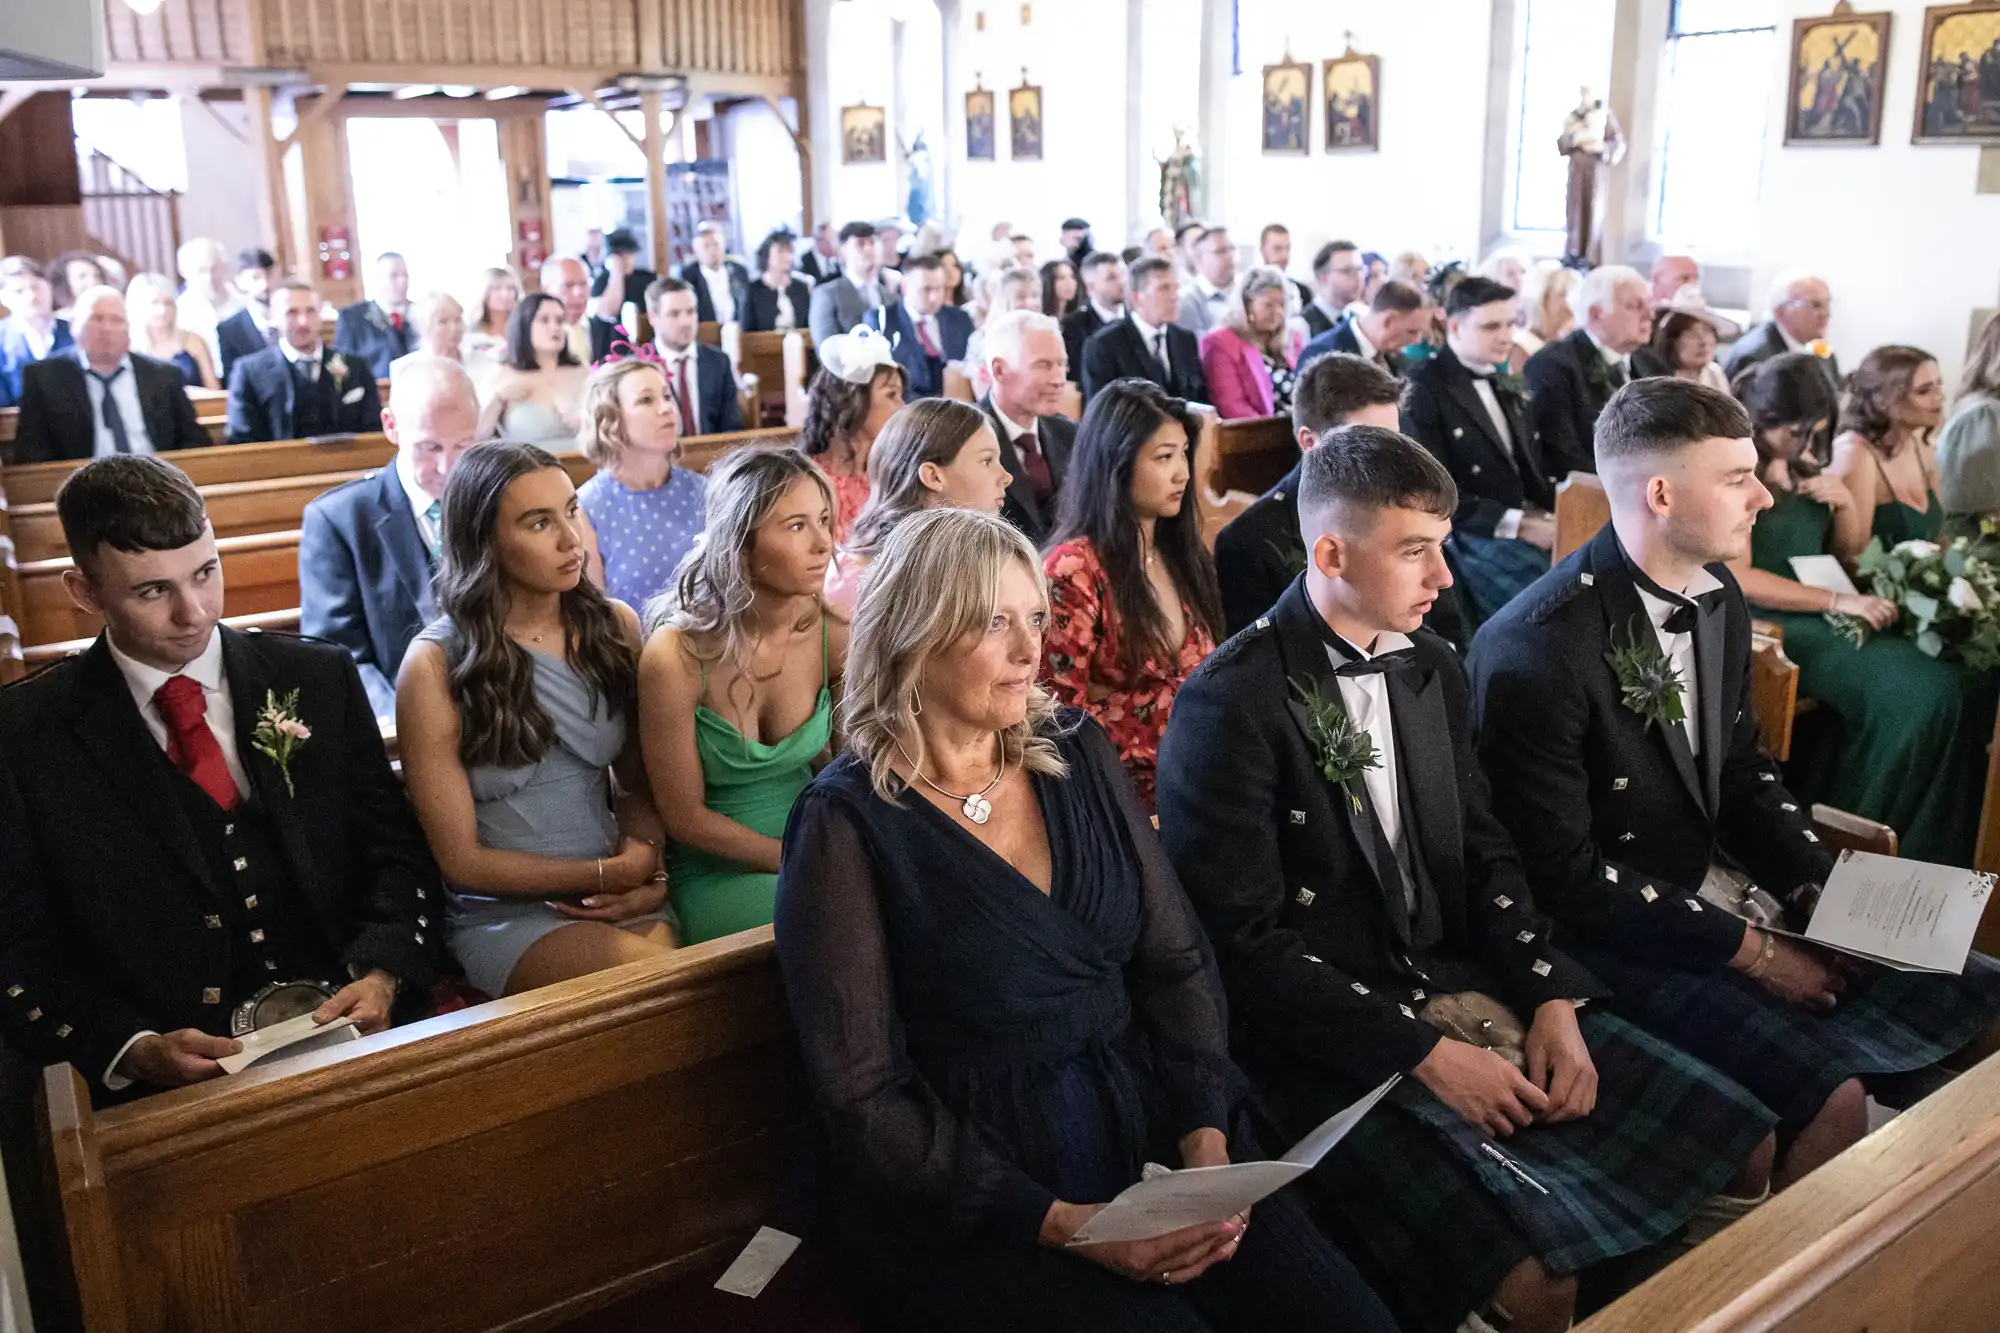 A congregation of formally dressed people attending a church ceremony, some in suits and one in a traditional kilt.